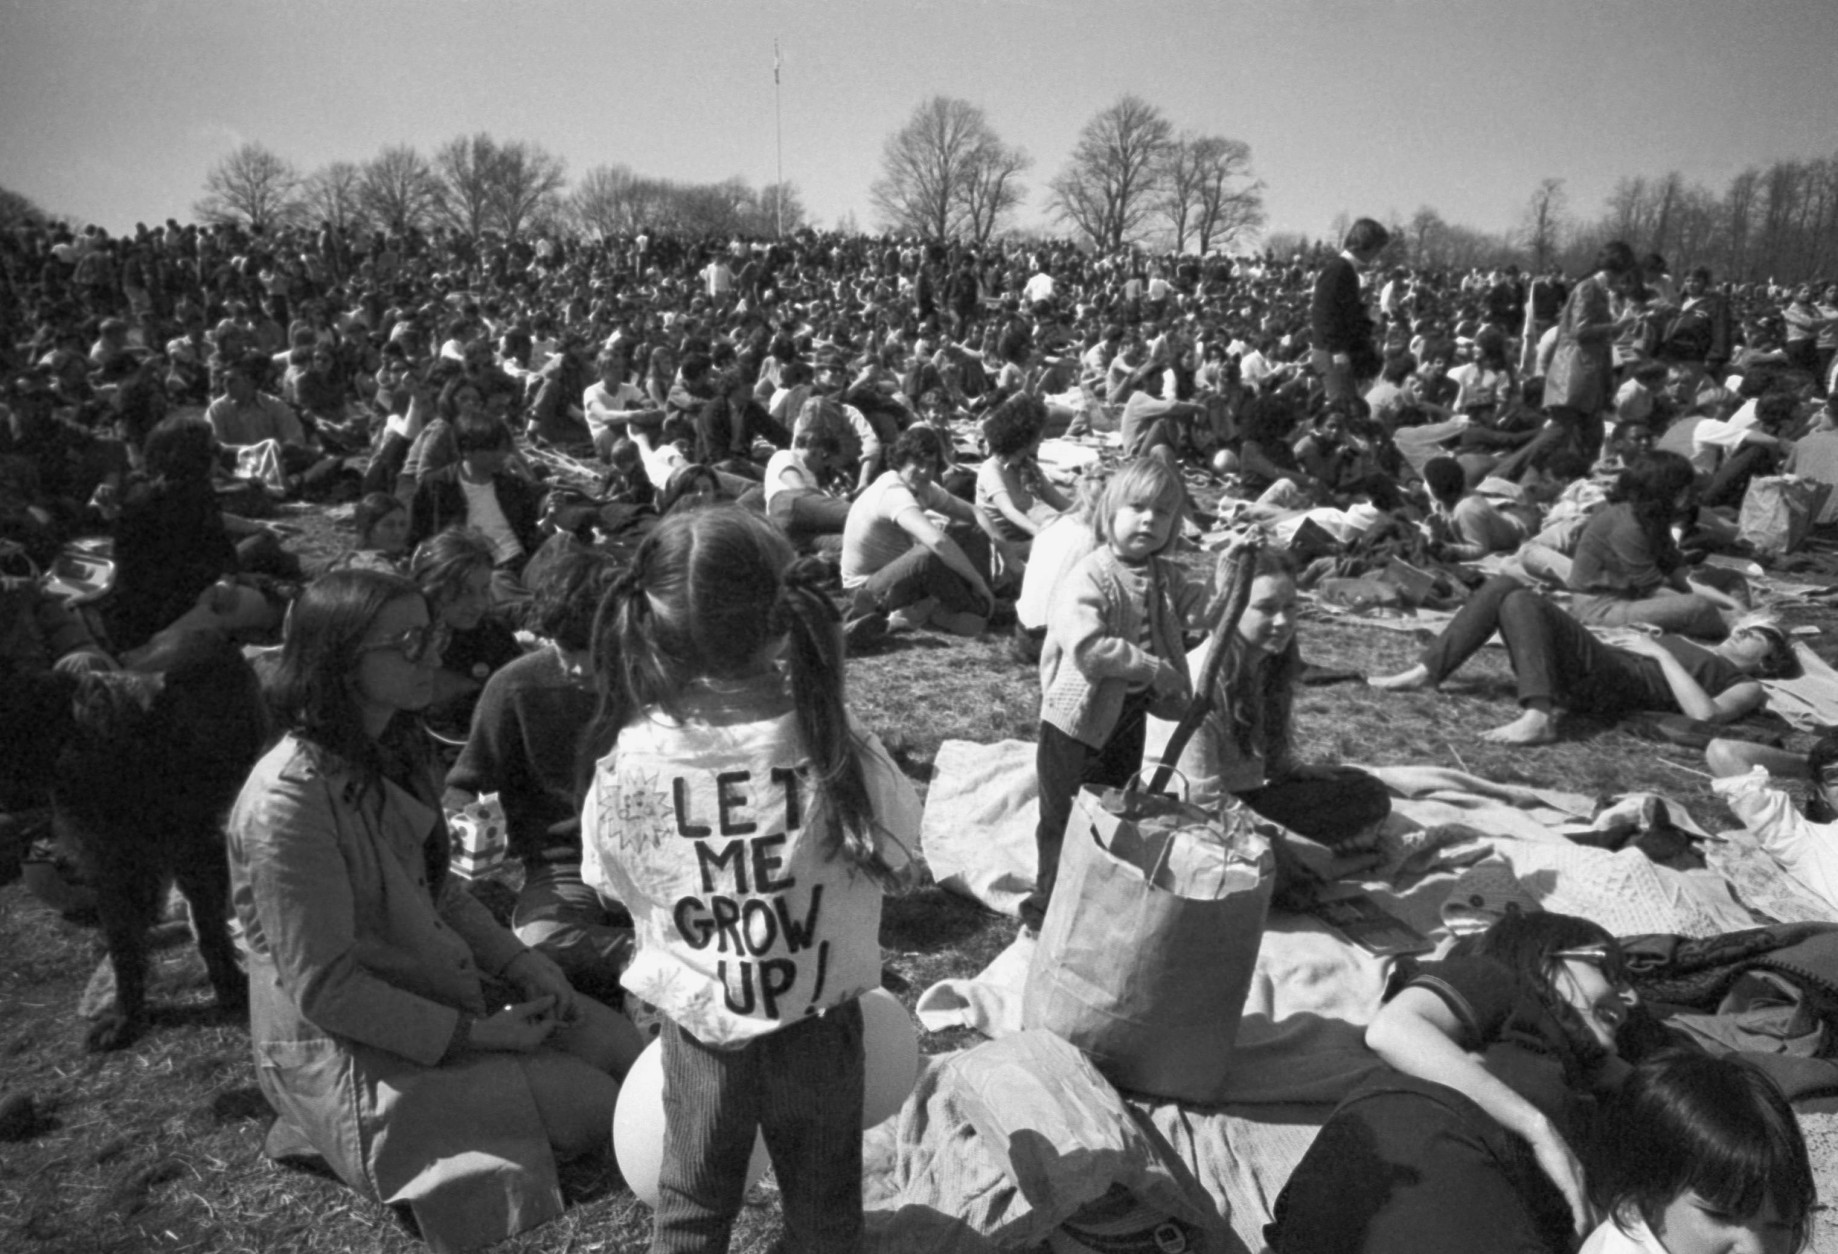 Part of crowd observing Earth Day, including, youngster wearing "Let Me Grow Up:" sign on back relaxes on hilltop in Philadelphia's Fairmount Park Wednesday, April 23, 1970. Crowd made up mostly of young people, was estimated at more than 20,000 persons. (AP Photo)